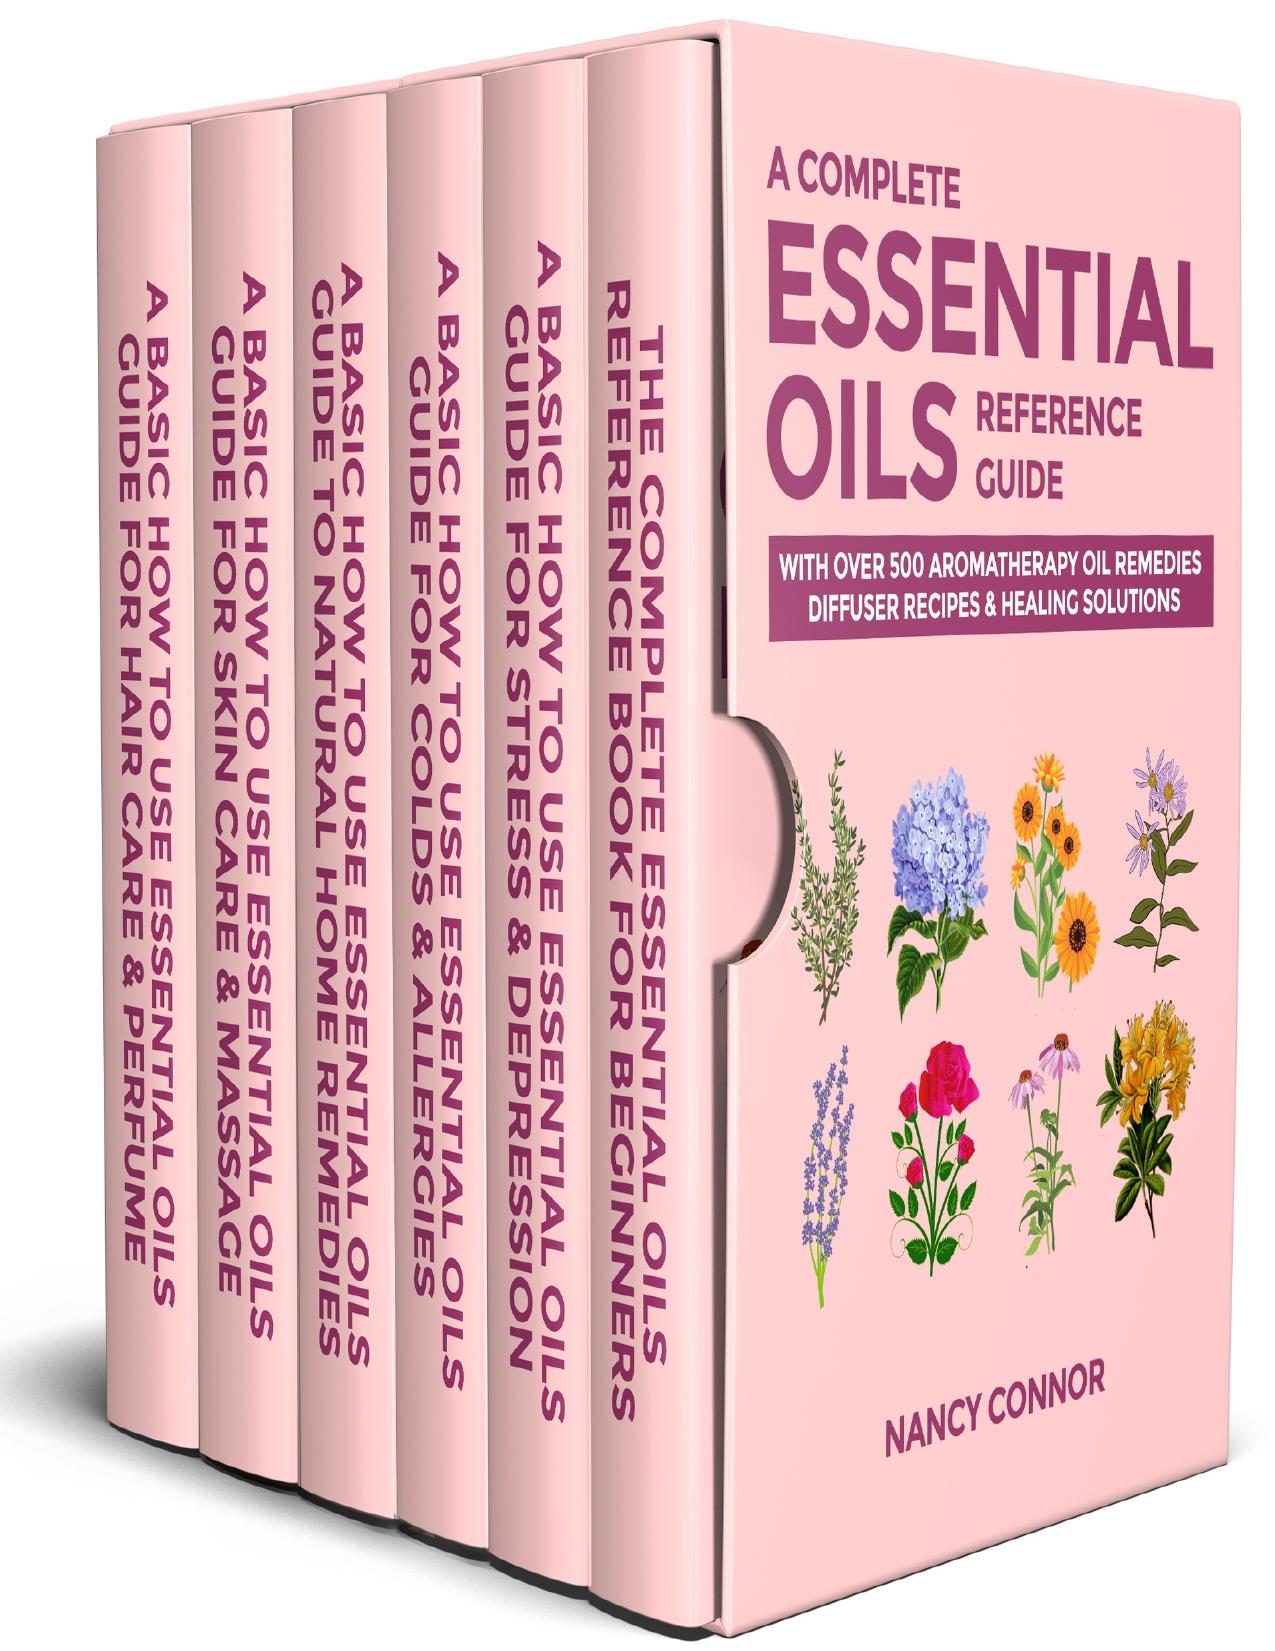 A Complete Essential Oils Reference Guide: With Over 500 Aromatherapy Oil Remedies, Diffuser Recipes & Healing Solutions (Essential Oil Recipes and Natural Home Remedies Book 9) by Connor Nancy